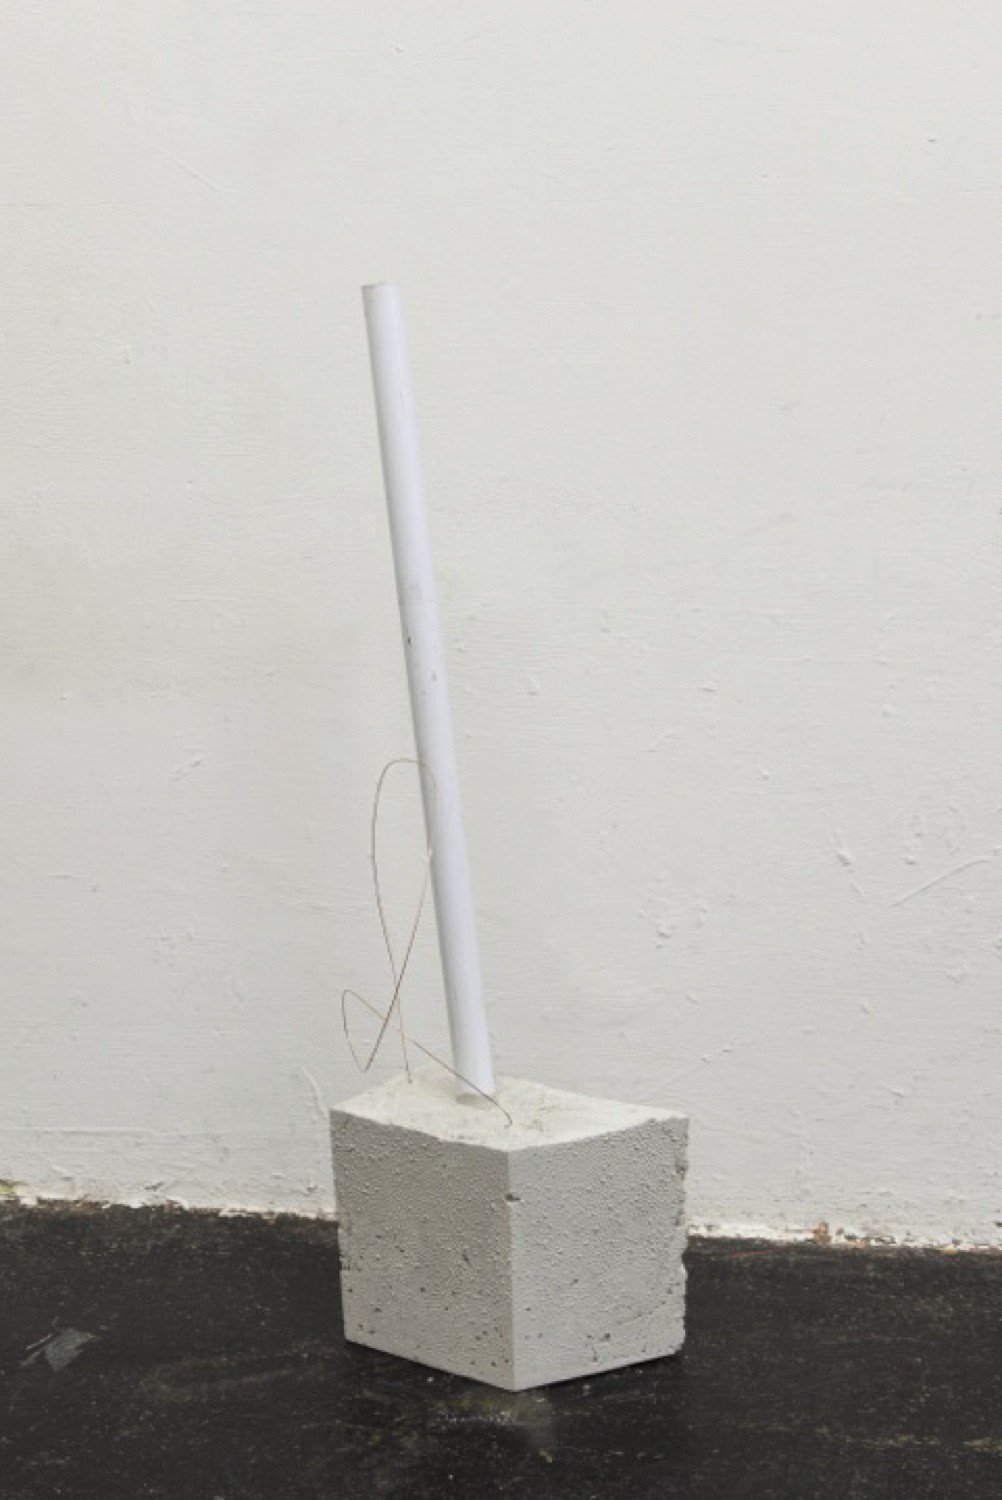 Andy Bootuntitled, 2012Concrete, metal72 x 22 x 12 cm